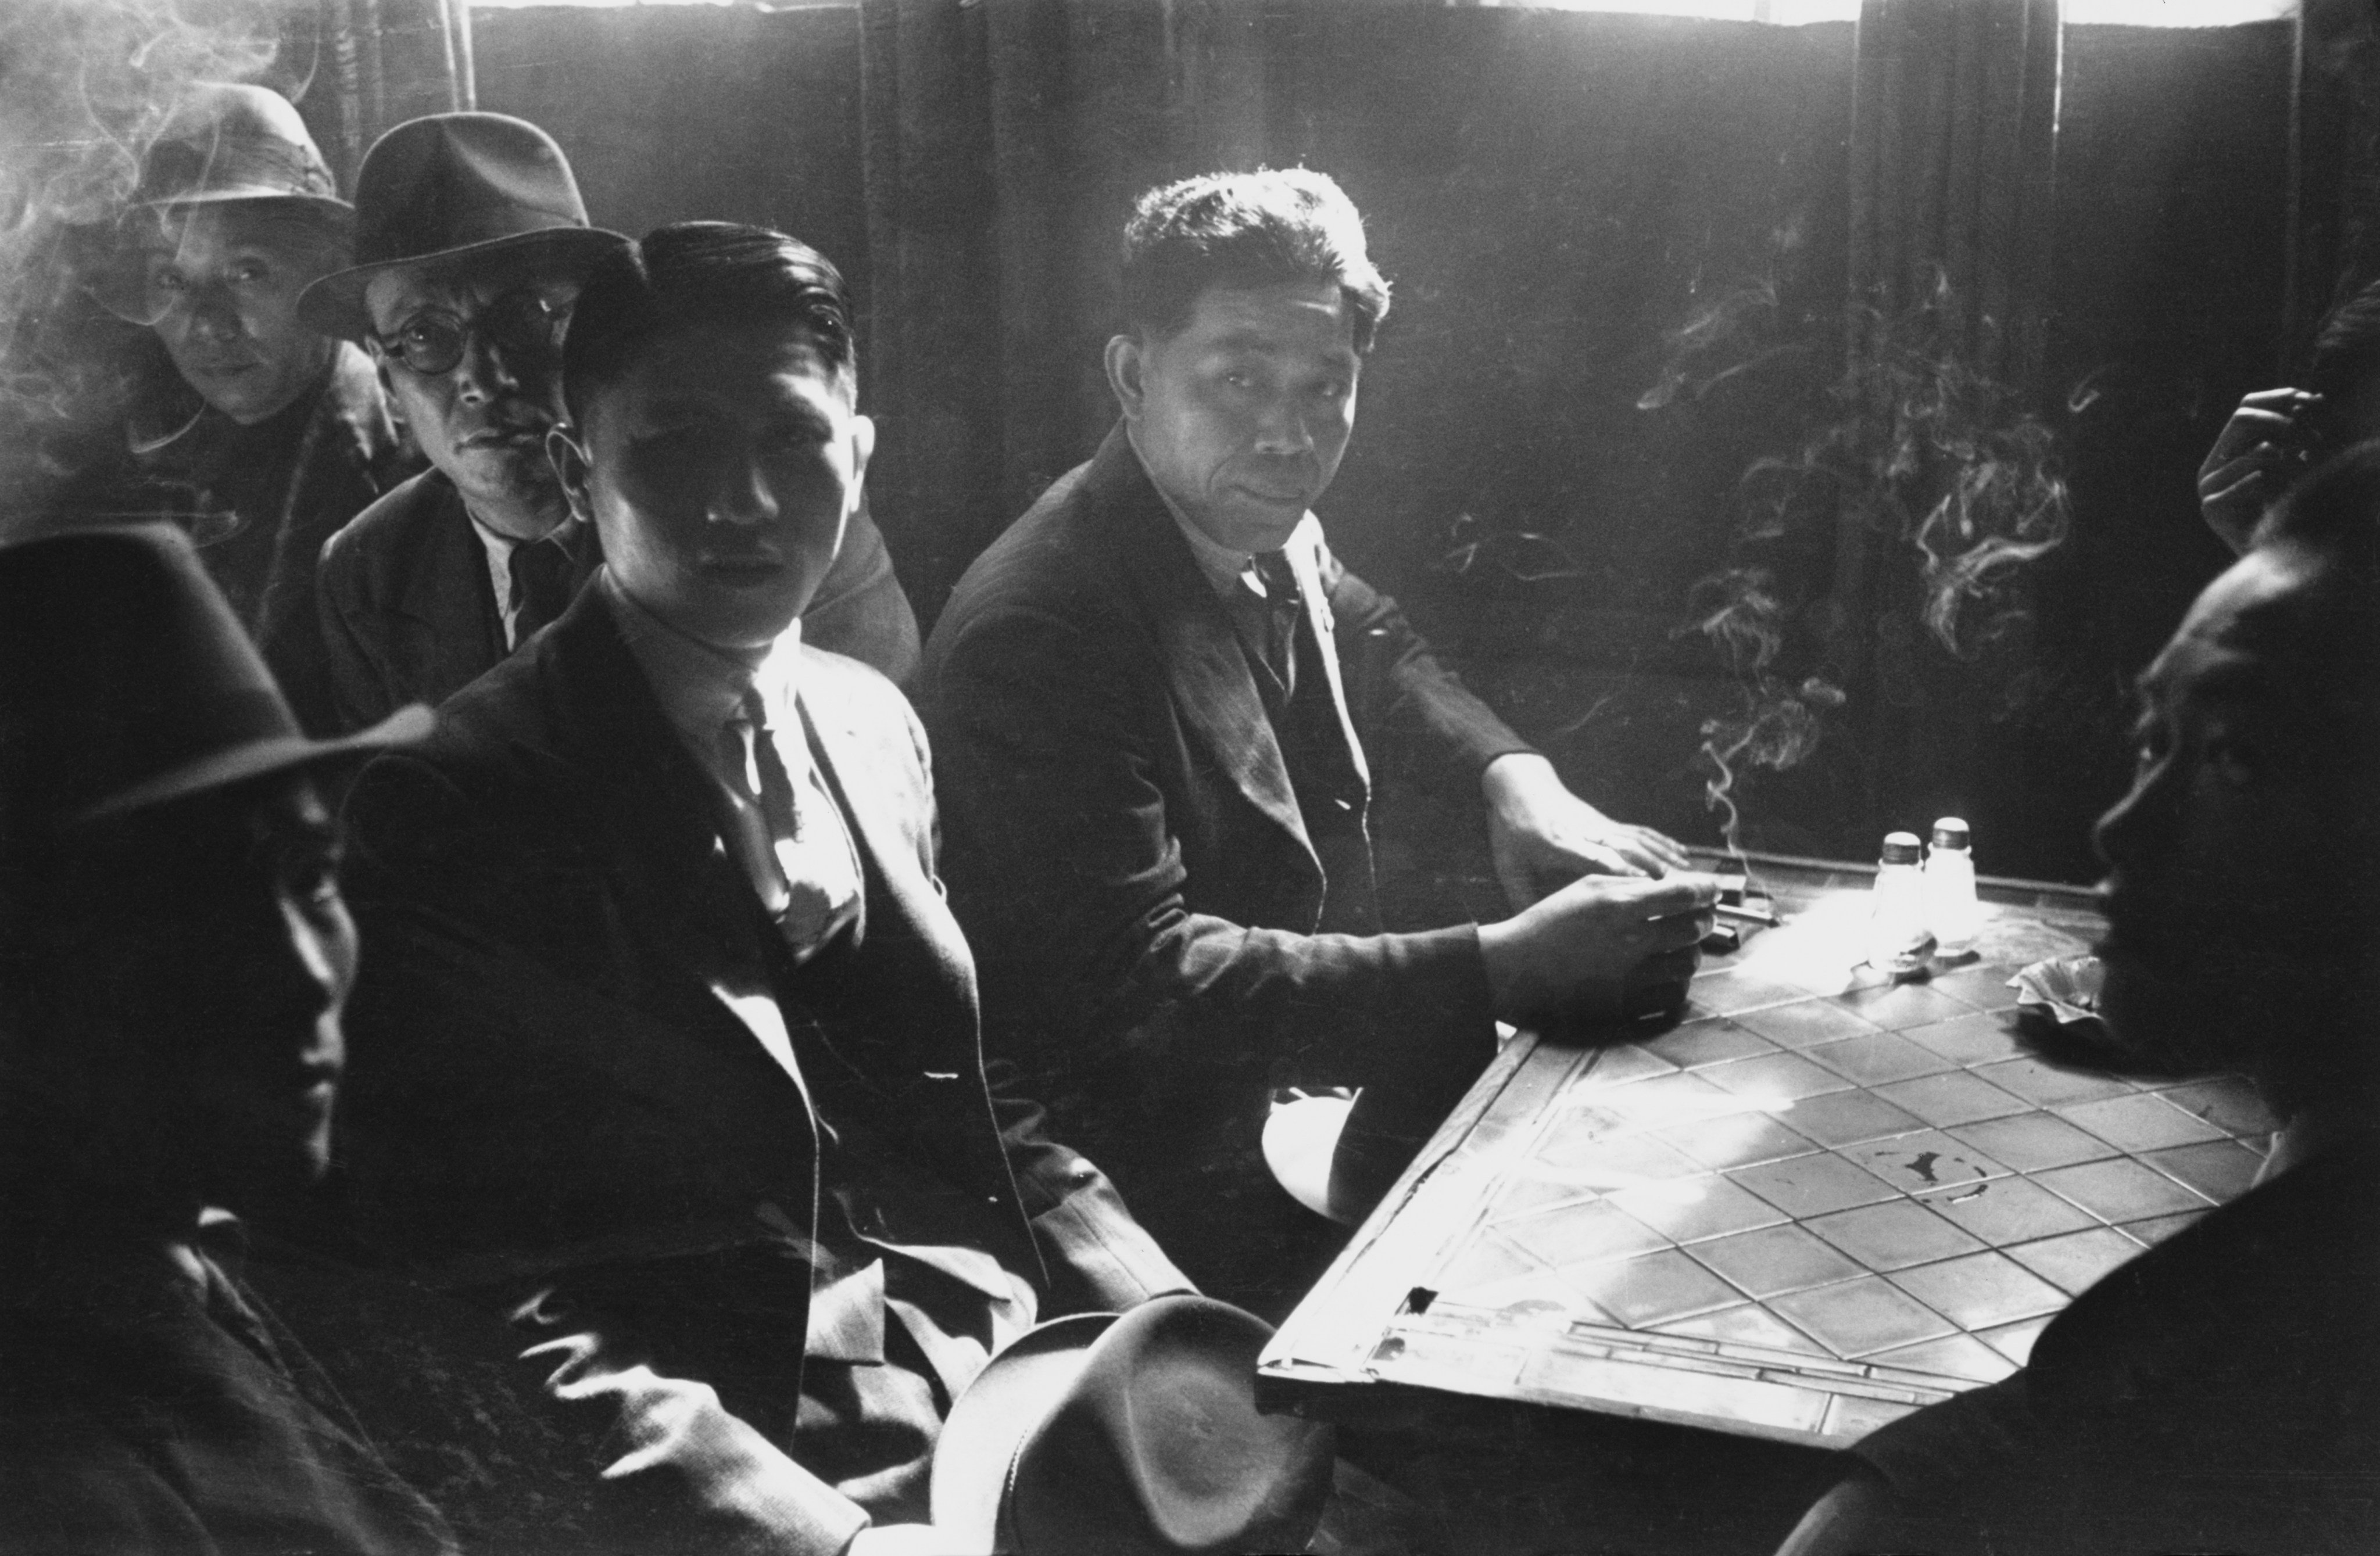 Chinese seamen at a hostel in Liverpool, May 1942. Photo: Getty Images